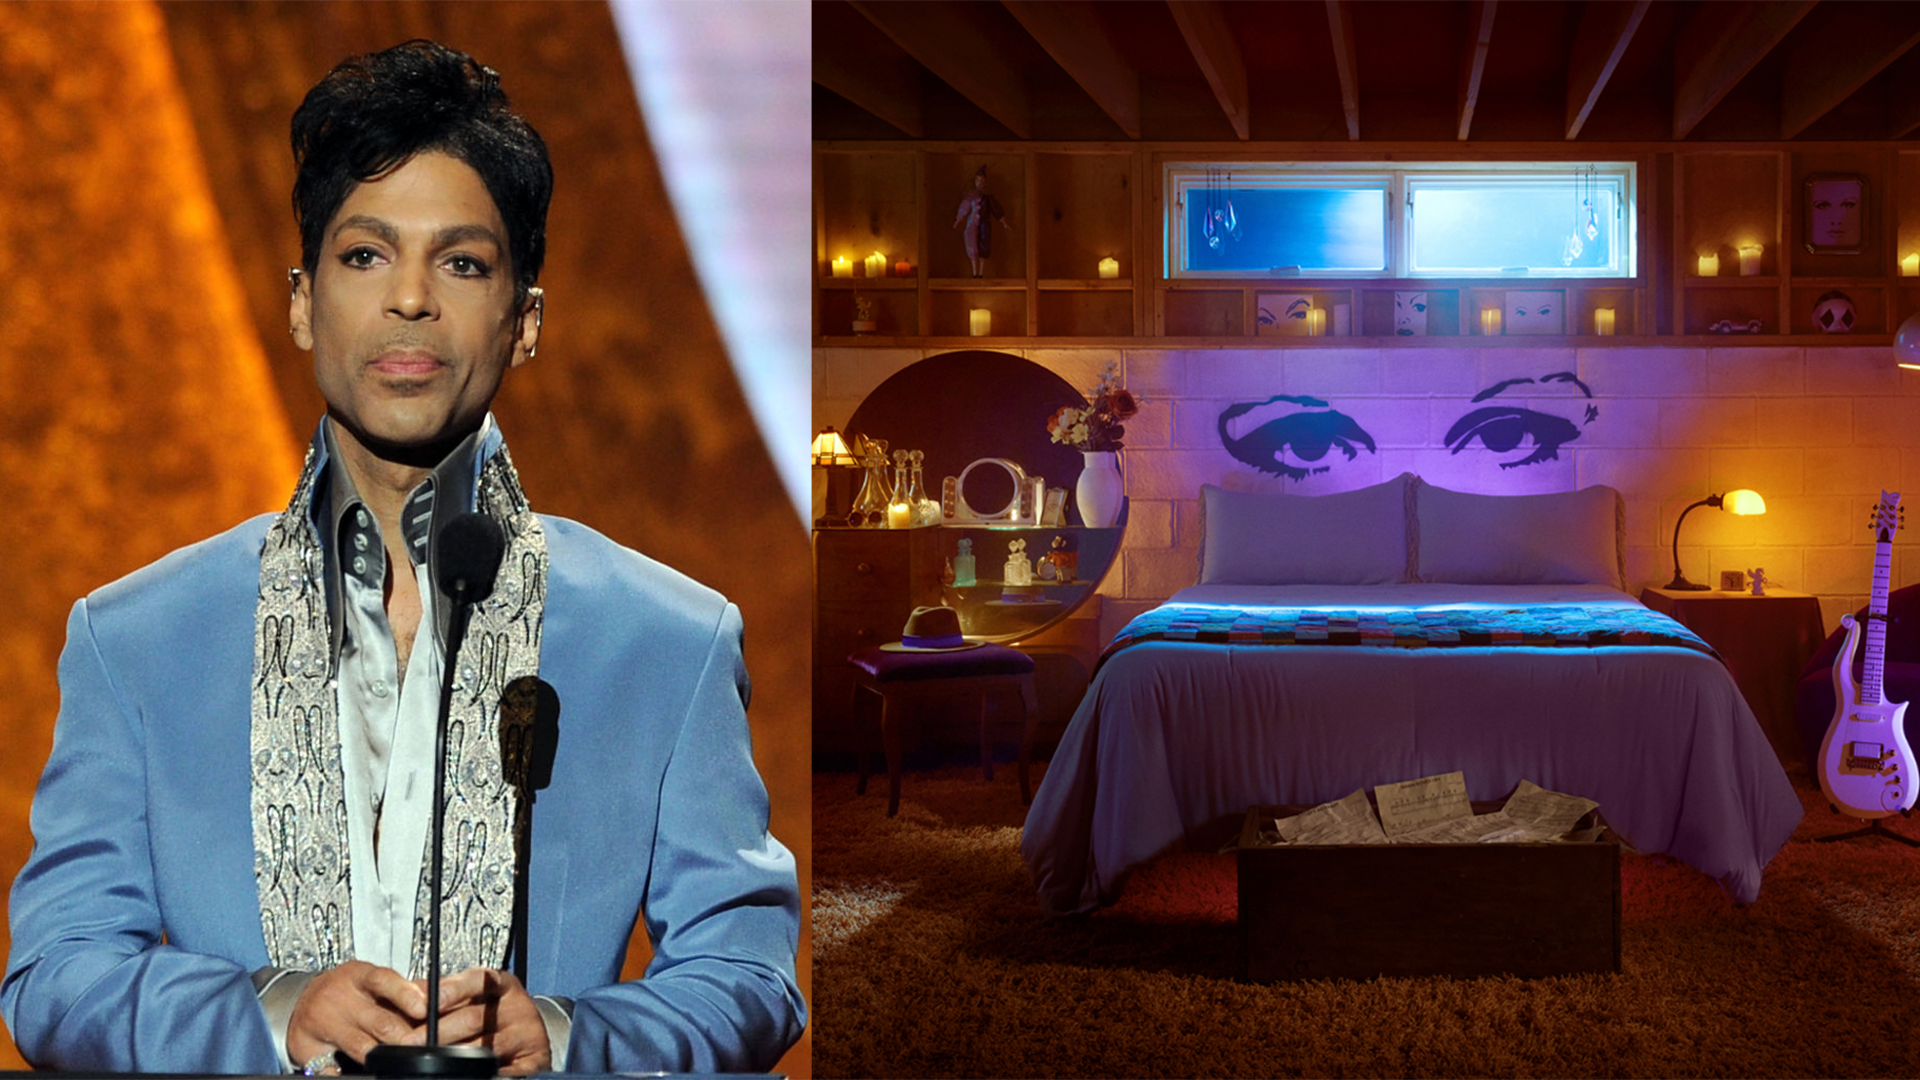 Tech Company Airbnb To Offer New Experiences Including A Chance To Stay In Prince's Iconic 'Purple Rain' Home